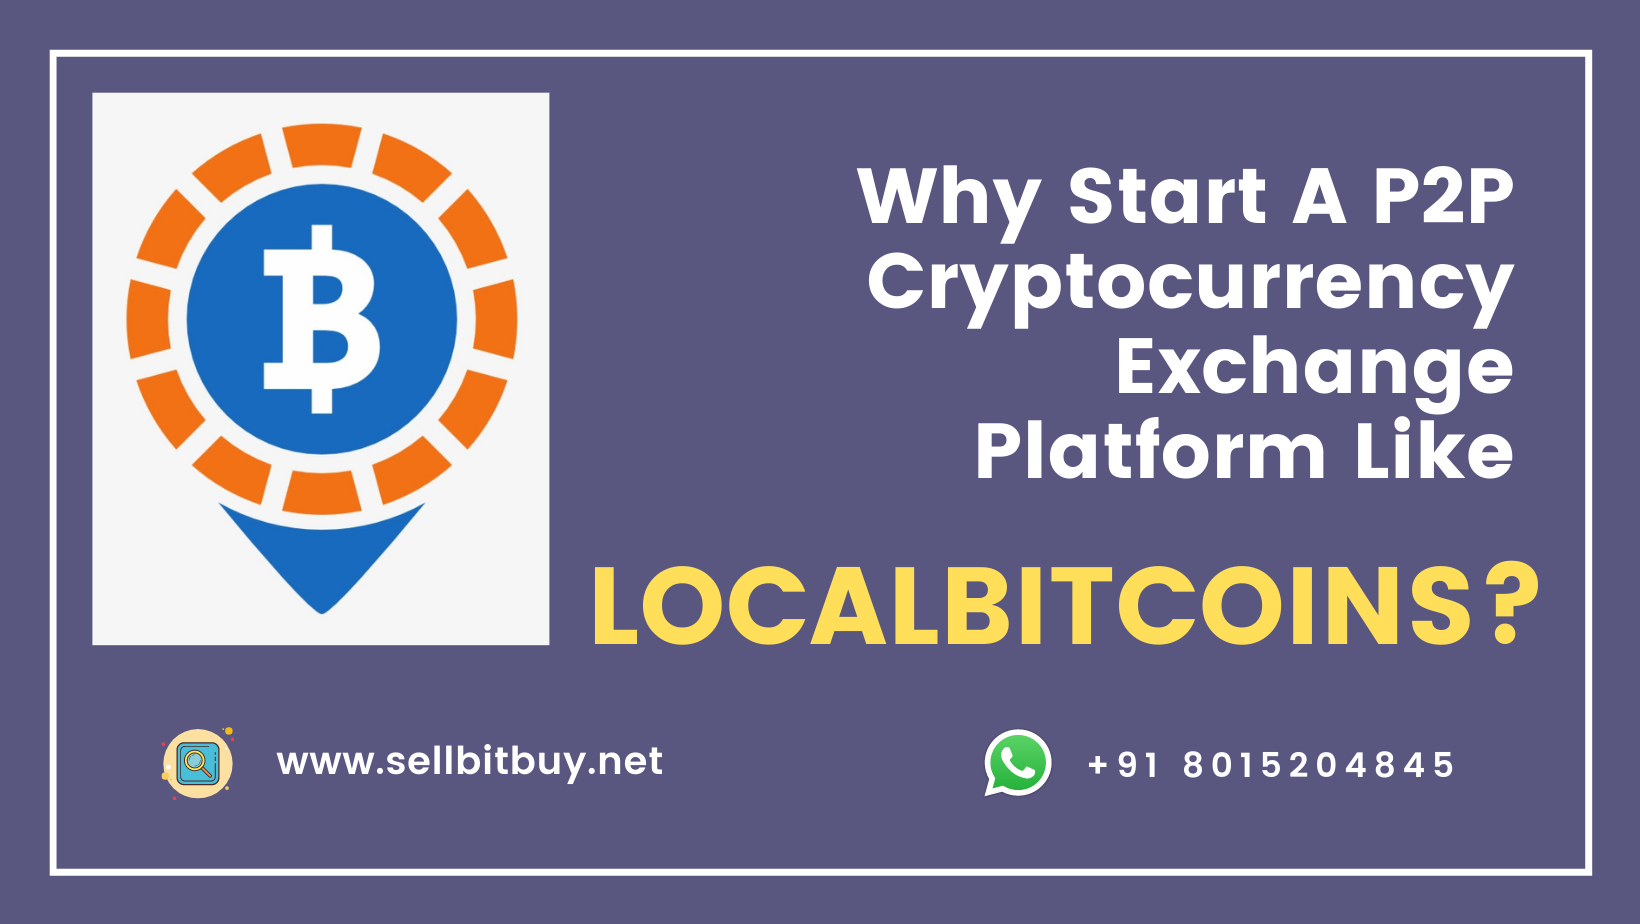 Article about Start A P2P Cryptocurrency Exchange Platform Like LocalBitcoins